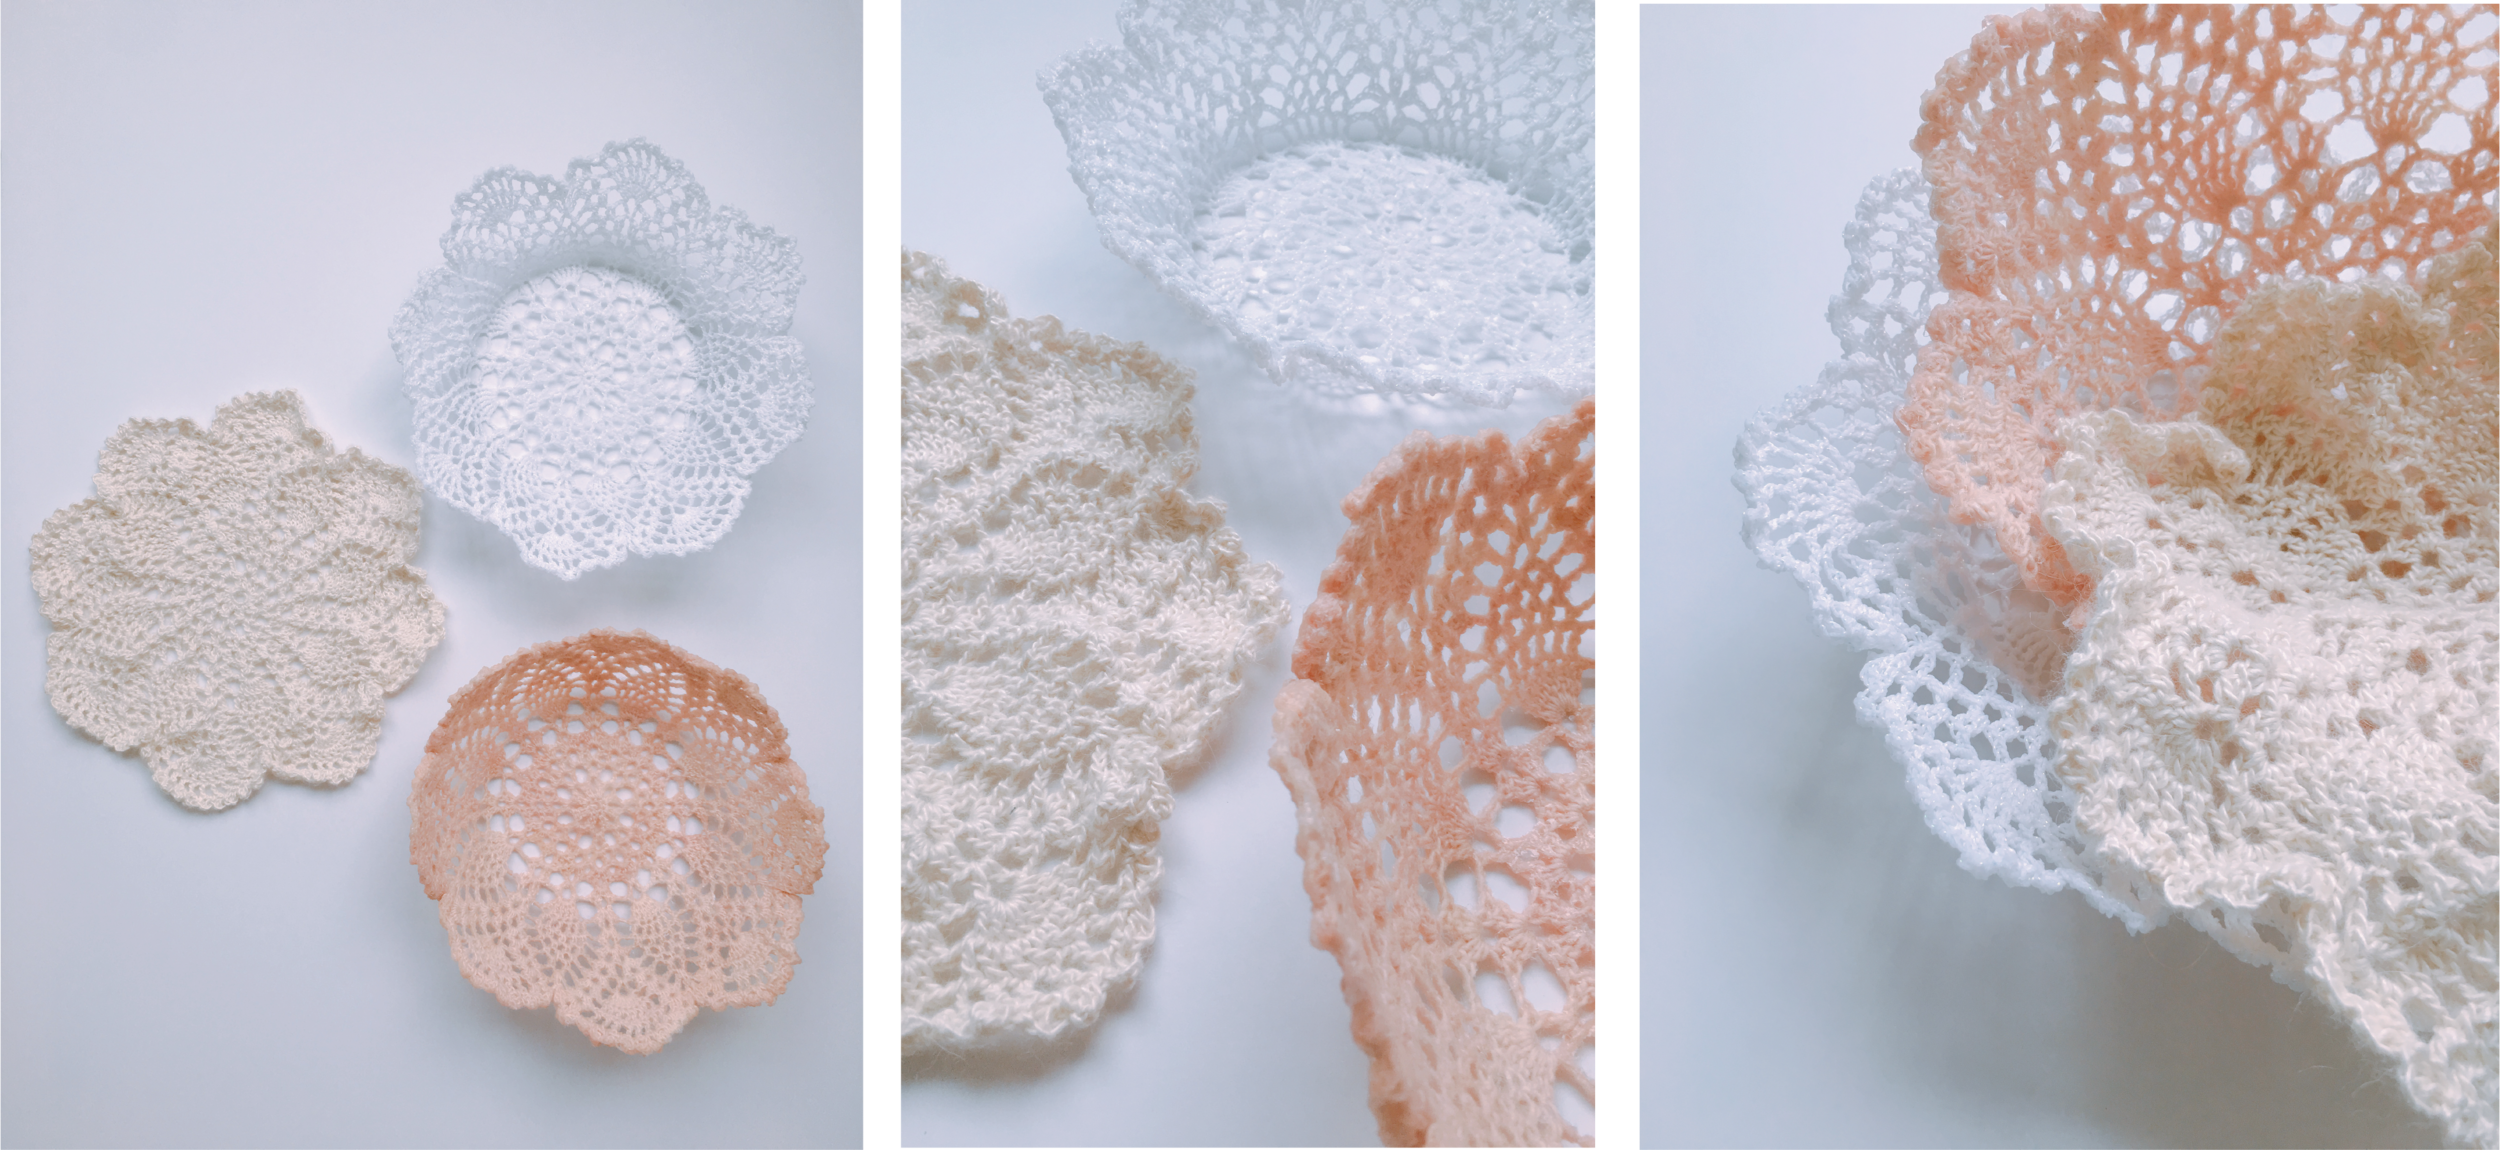 Transformation of Lace, 2018